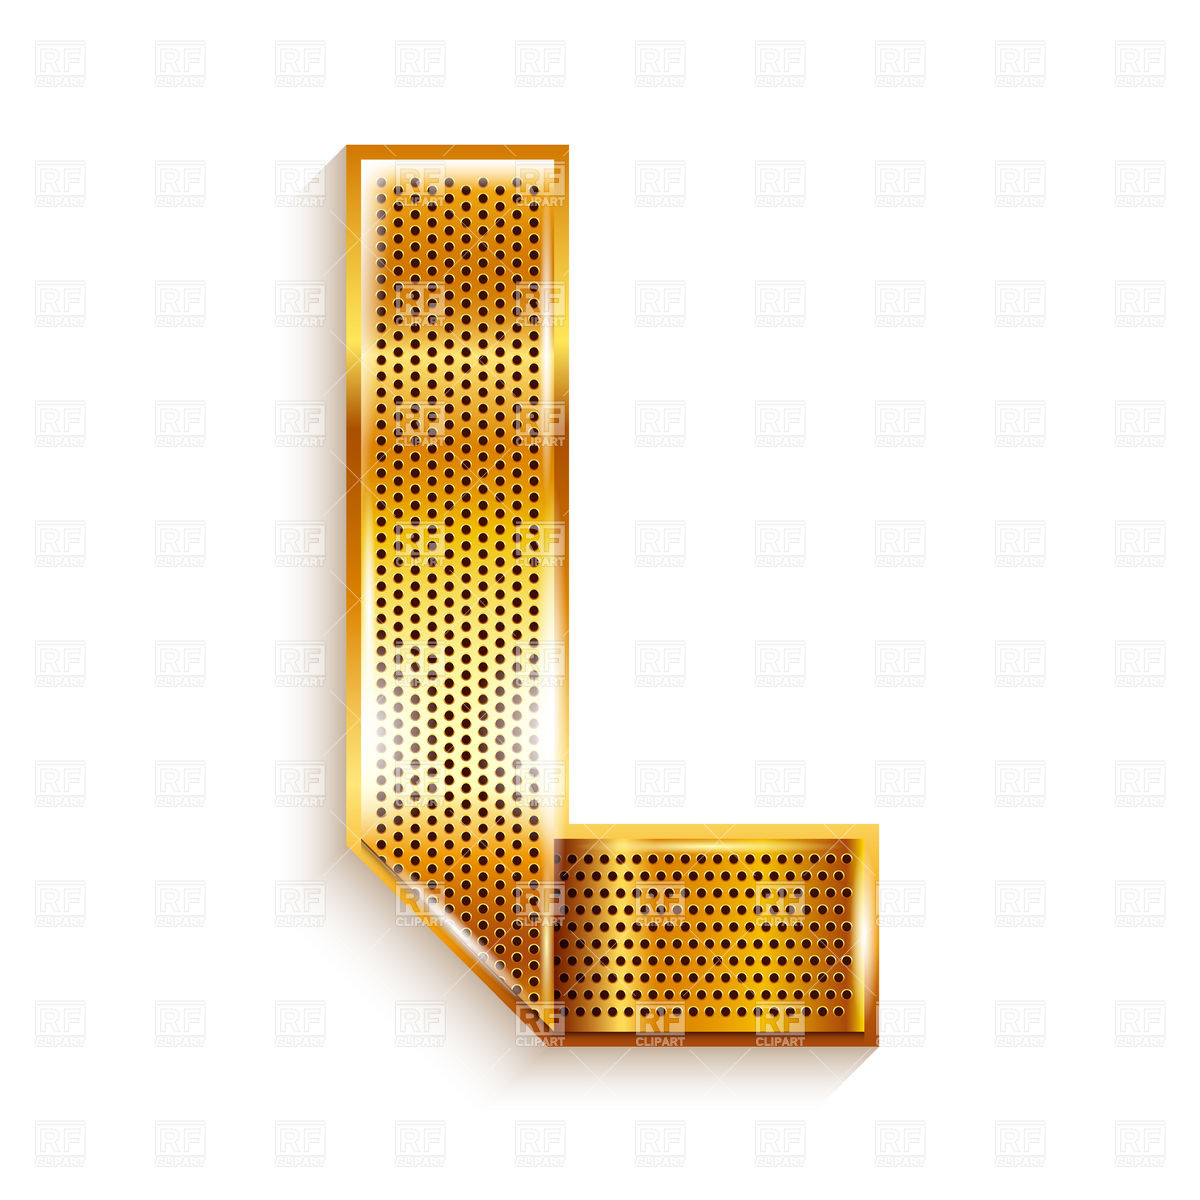     Tape Letter L 18270 Download Royalty Free Vector Clipart  Eps